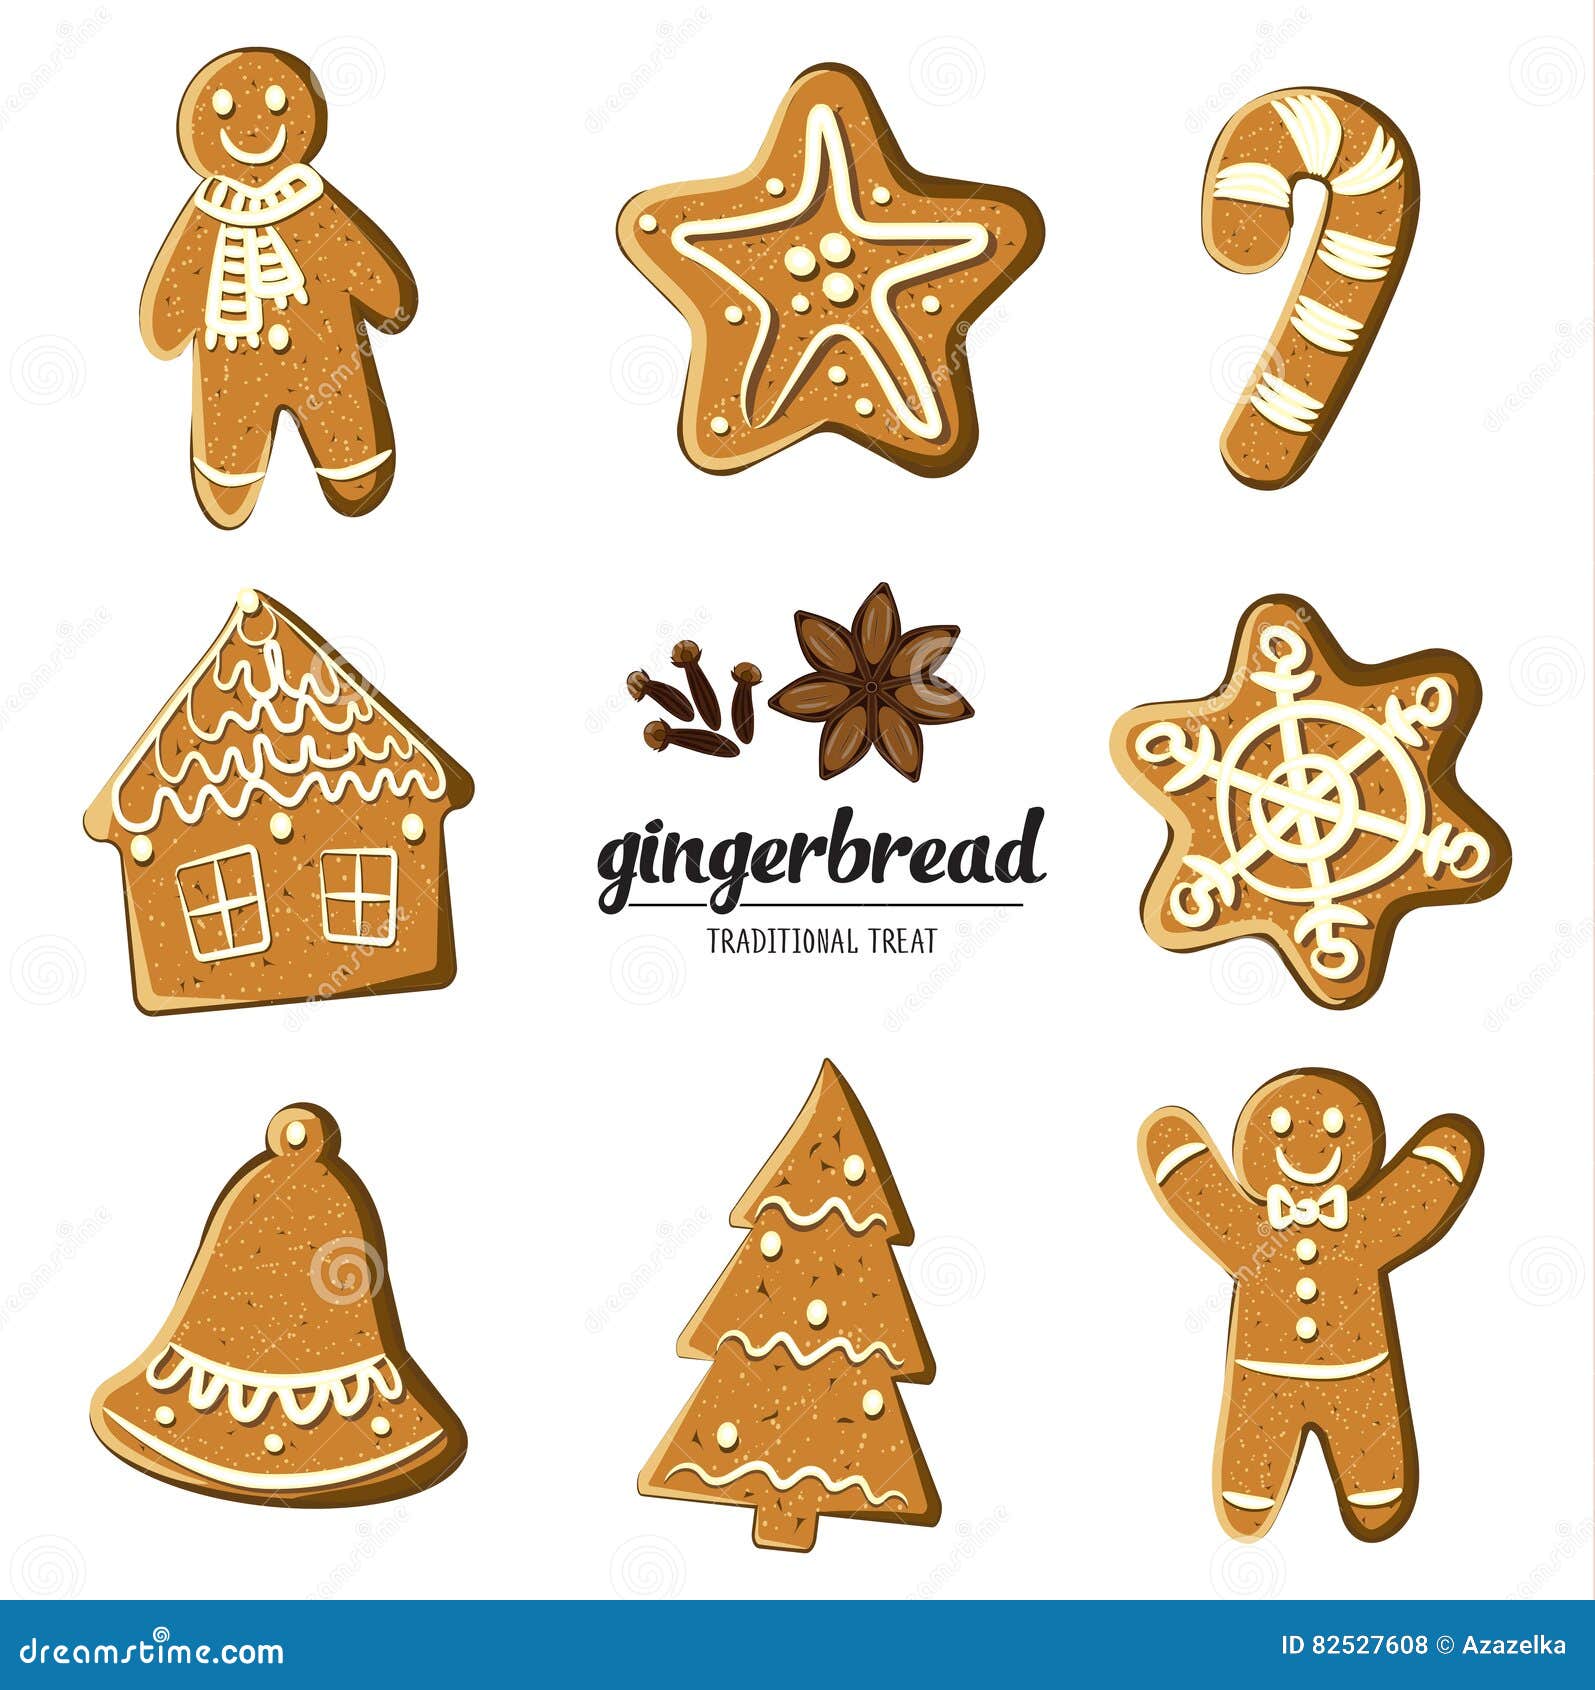 Christmas cookies - gingerbread men, christmas trees and stars on